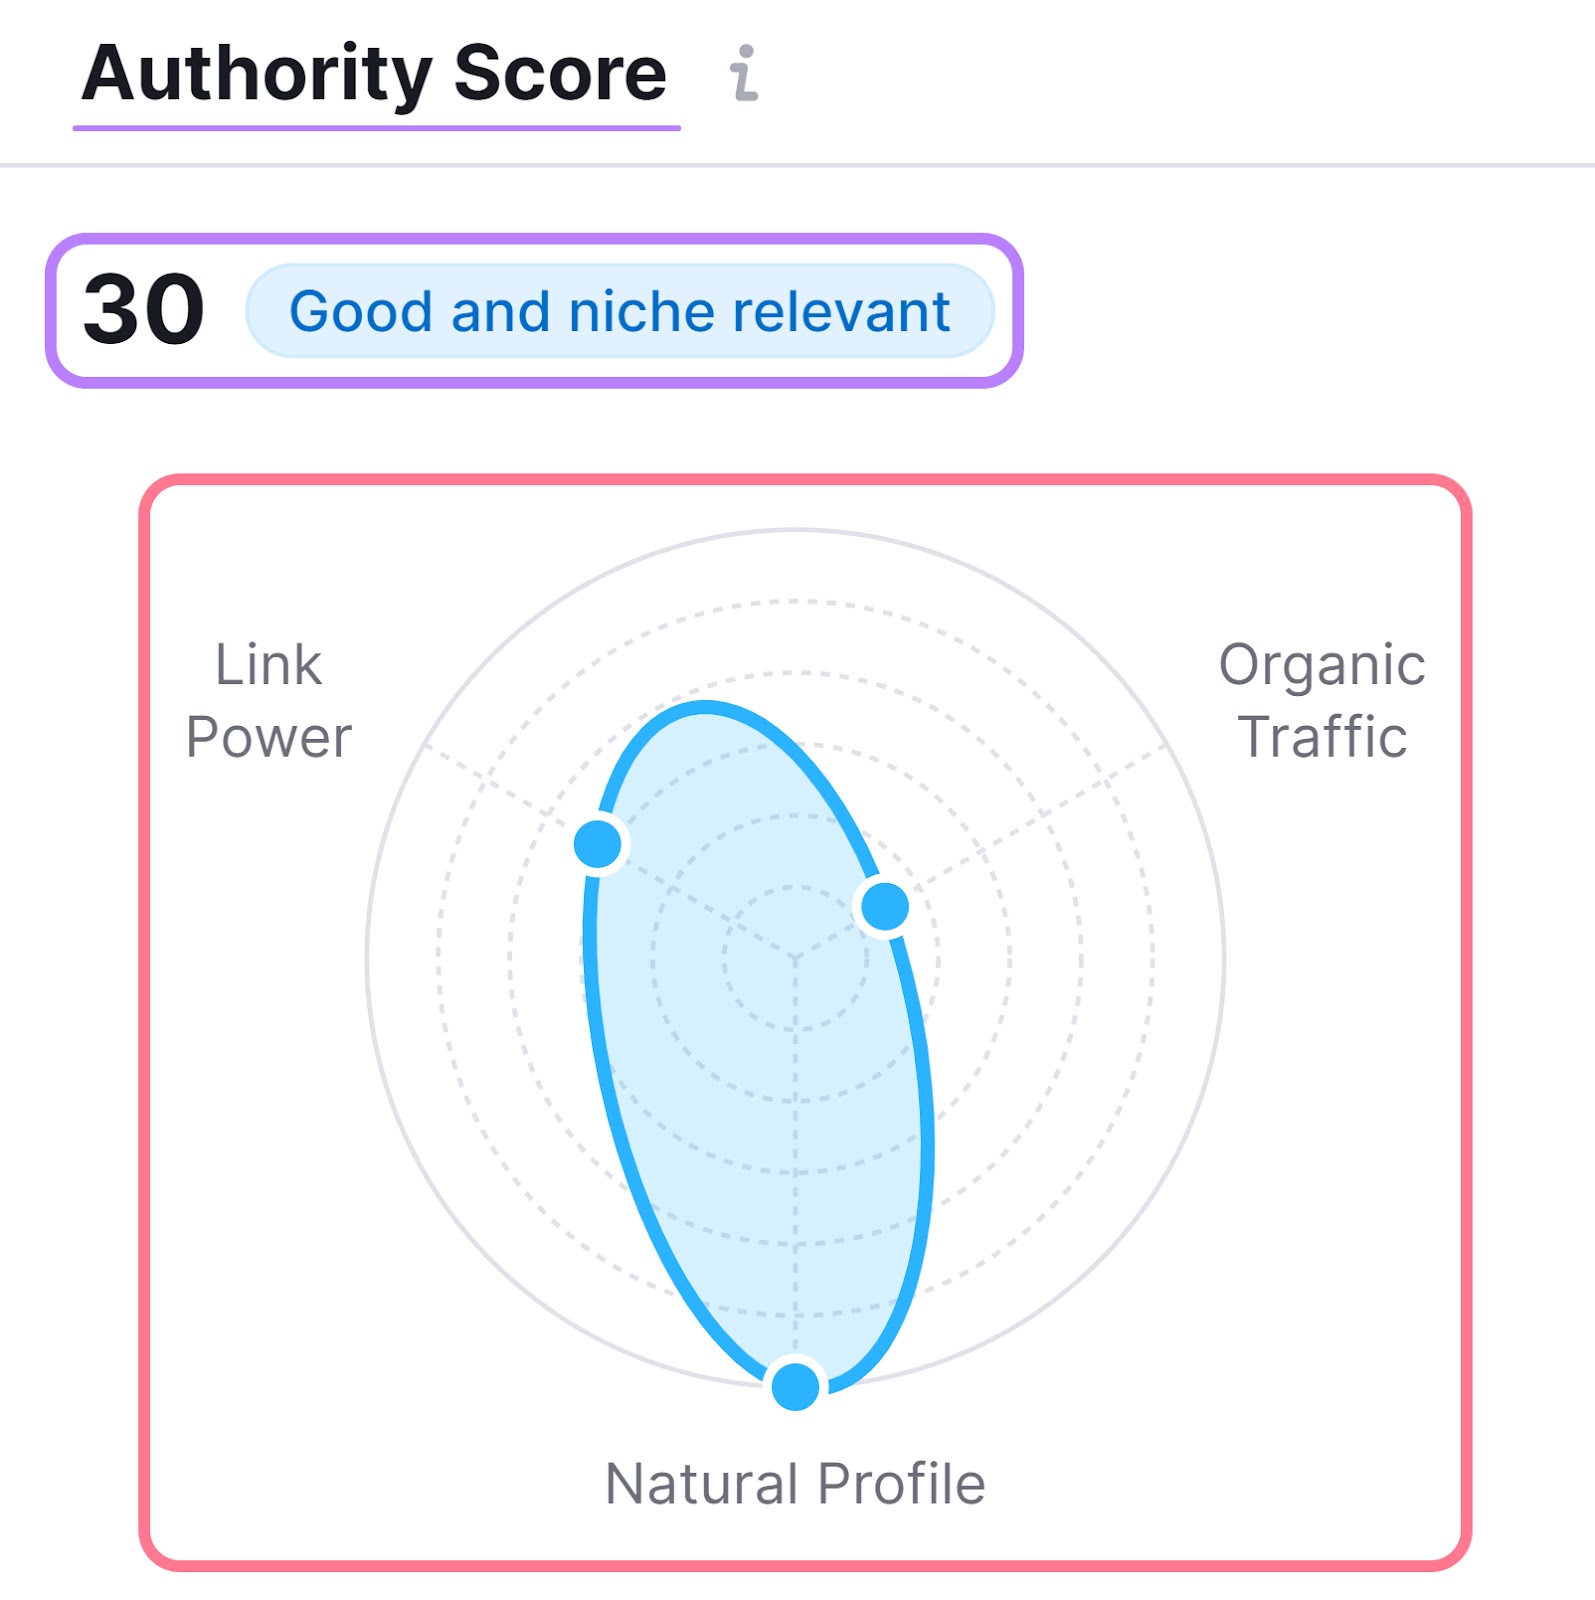 Authority Score metric in Backlink Analytics tool, showing 30 good and niche relevant result